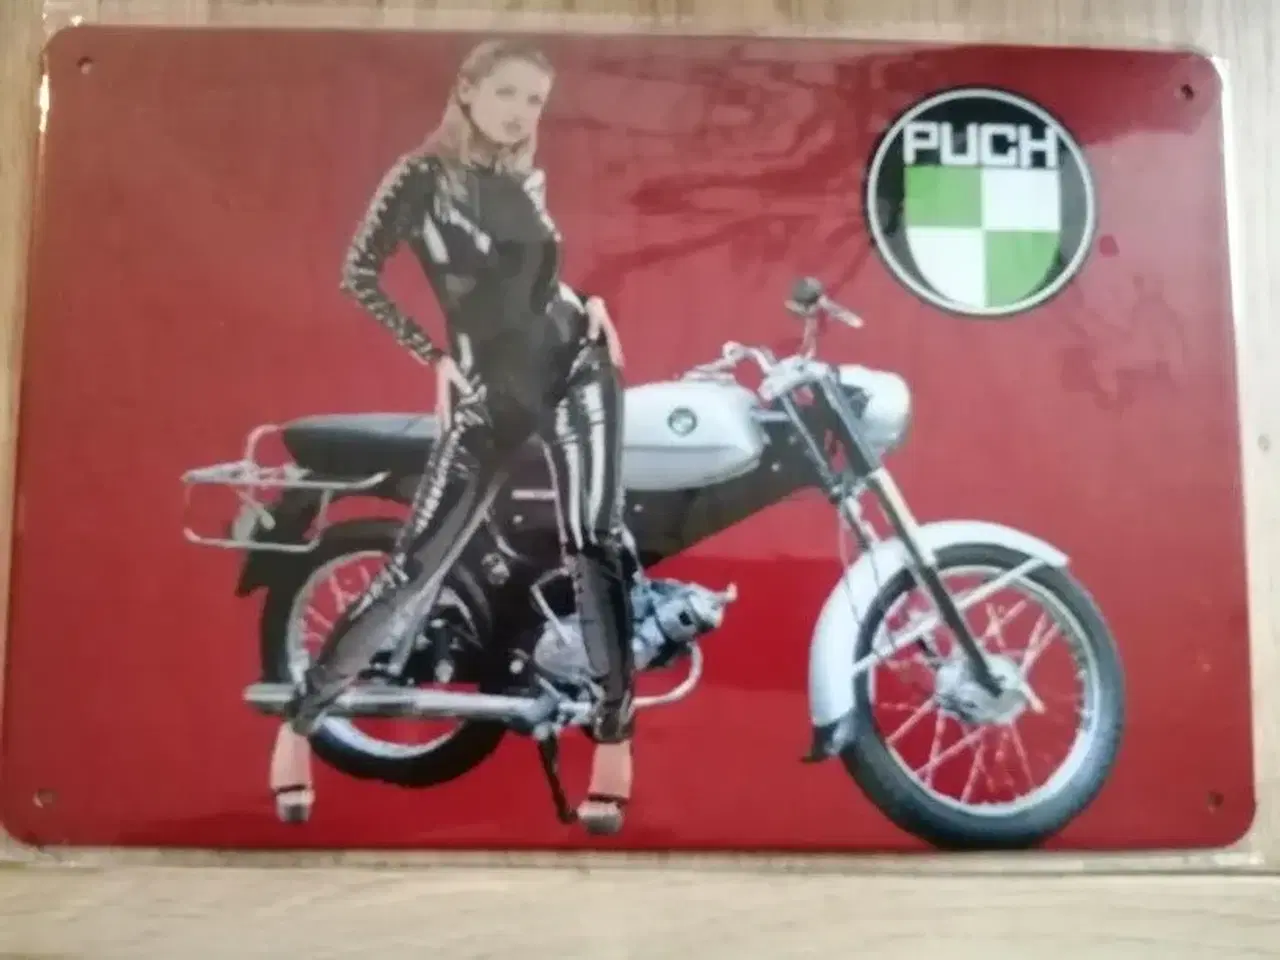 Billede 8 - puch maxi, puch mz50, puch monza juvel, puch ms50 